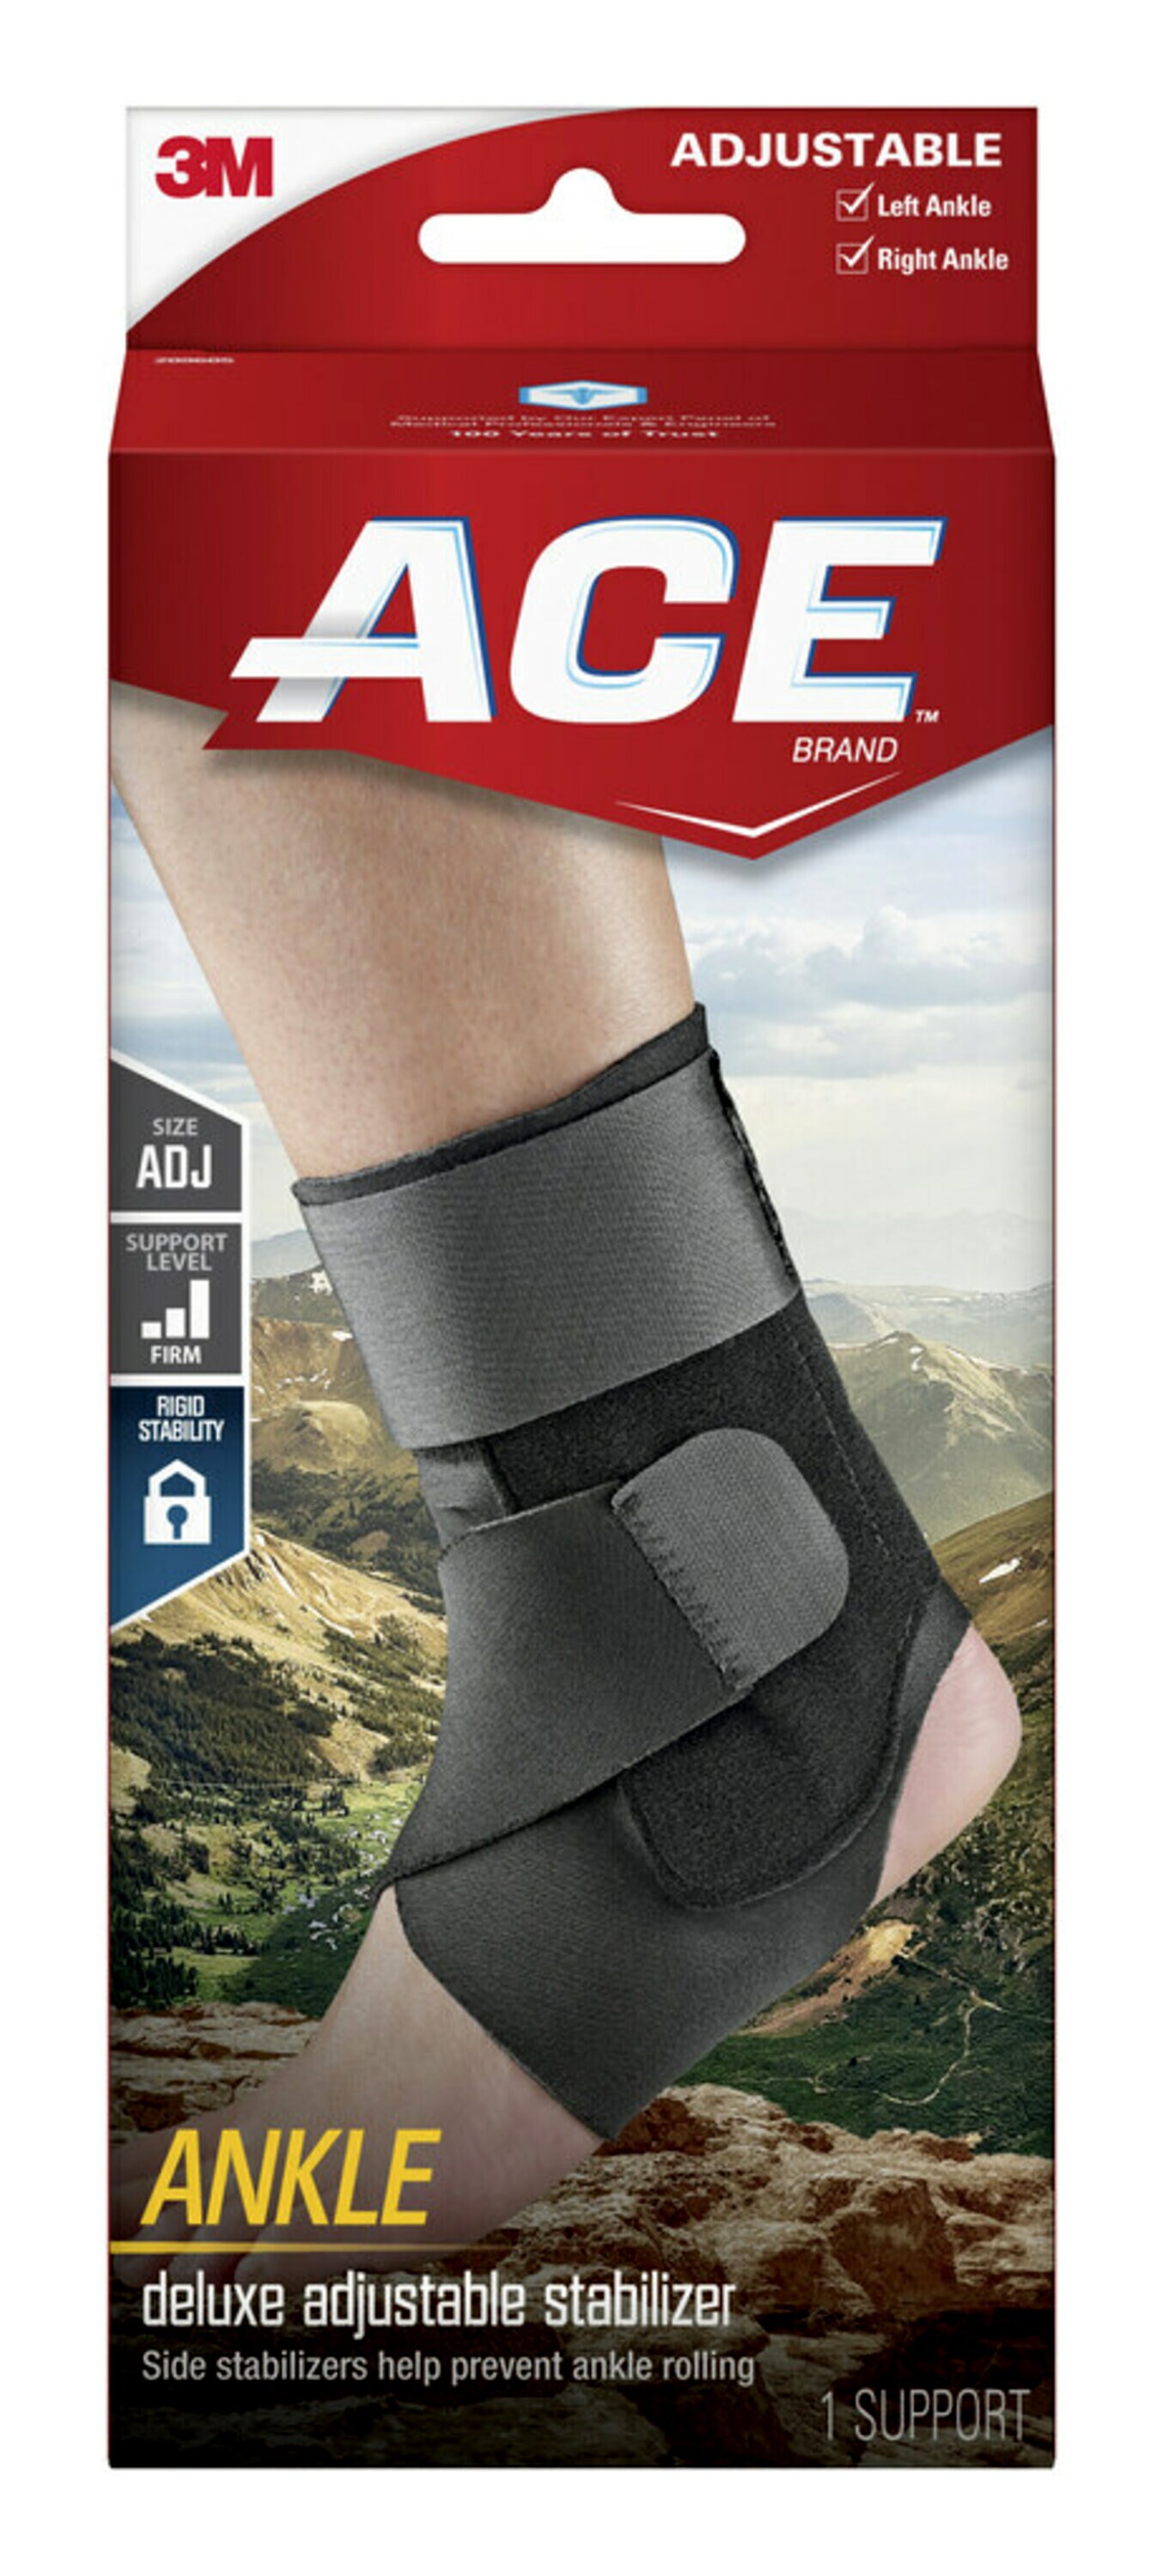 ACE Brand Deluxe Adjustable Ankle Stabilizer, Black – One Size Fits Most - image 1 of 6